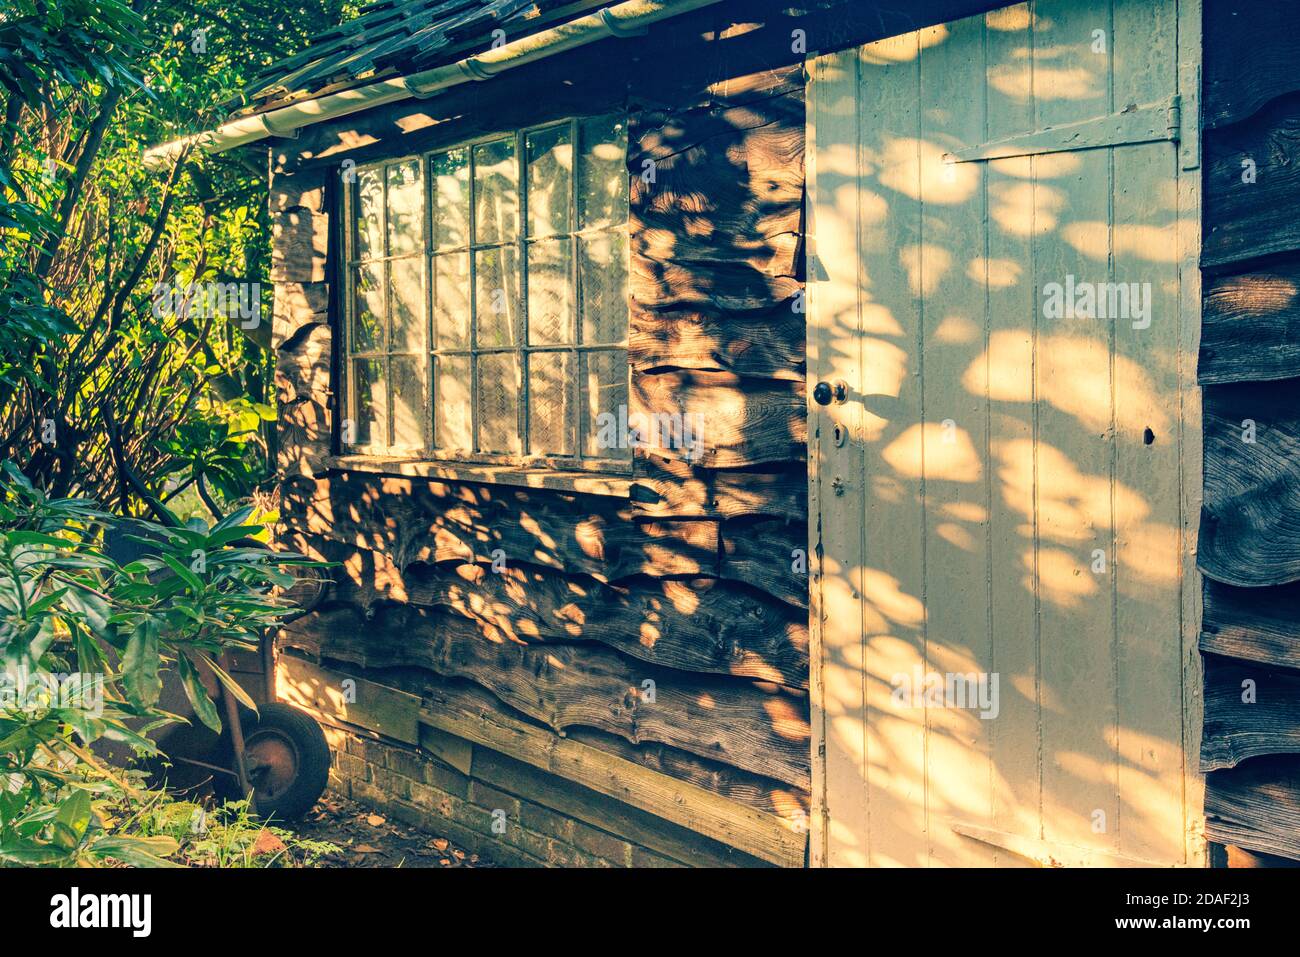 Garden shed with evening sinlight through hedge illuminationg wany edge oak boarding and window. Stock Photo